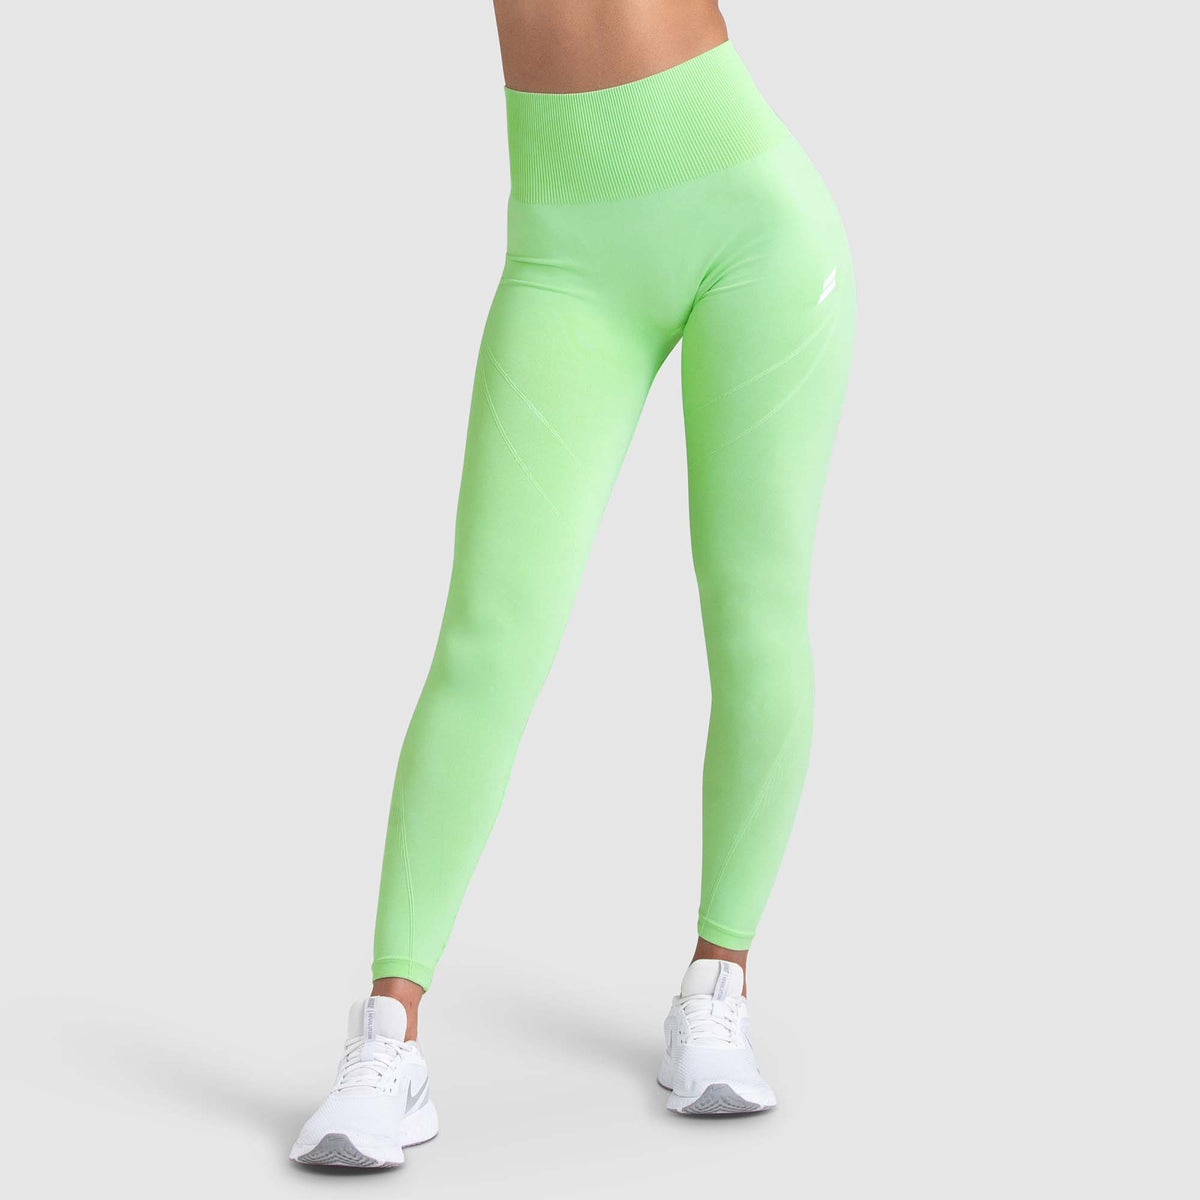 Neon Tights - Lime Green